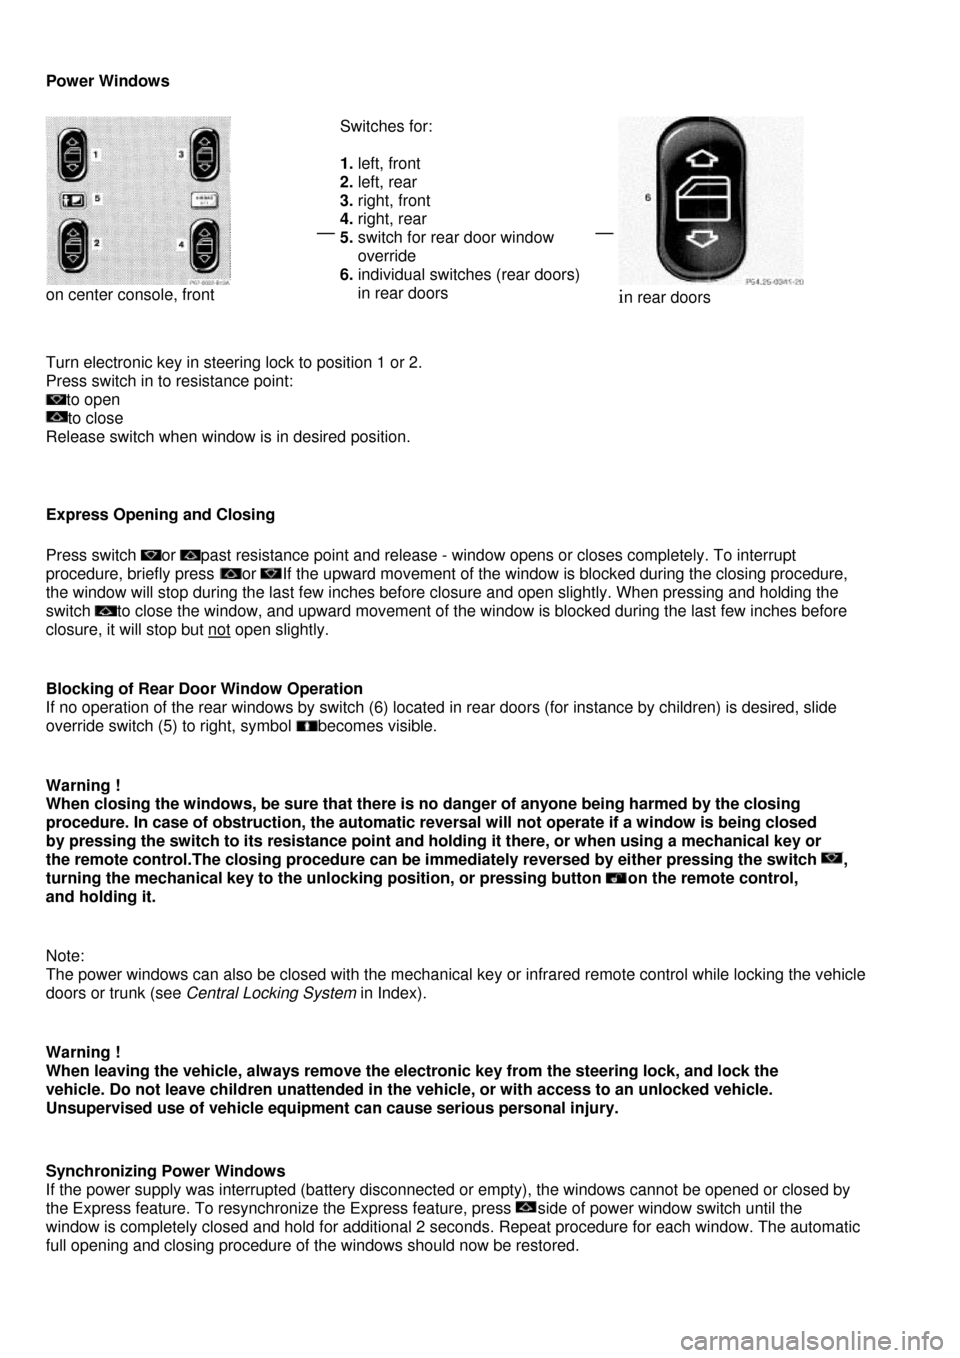 MERCEDES-BENZ C-Class 2000 W202 User Guide  
Power Windows 
 on center console, front 
 
Switches for: 
 
1. left, front 
2. left, rear 
3. right, front 
4. right, rear 
5. switch for rear door window 
    override 
6. individual switches (rea